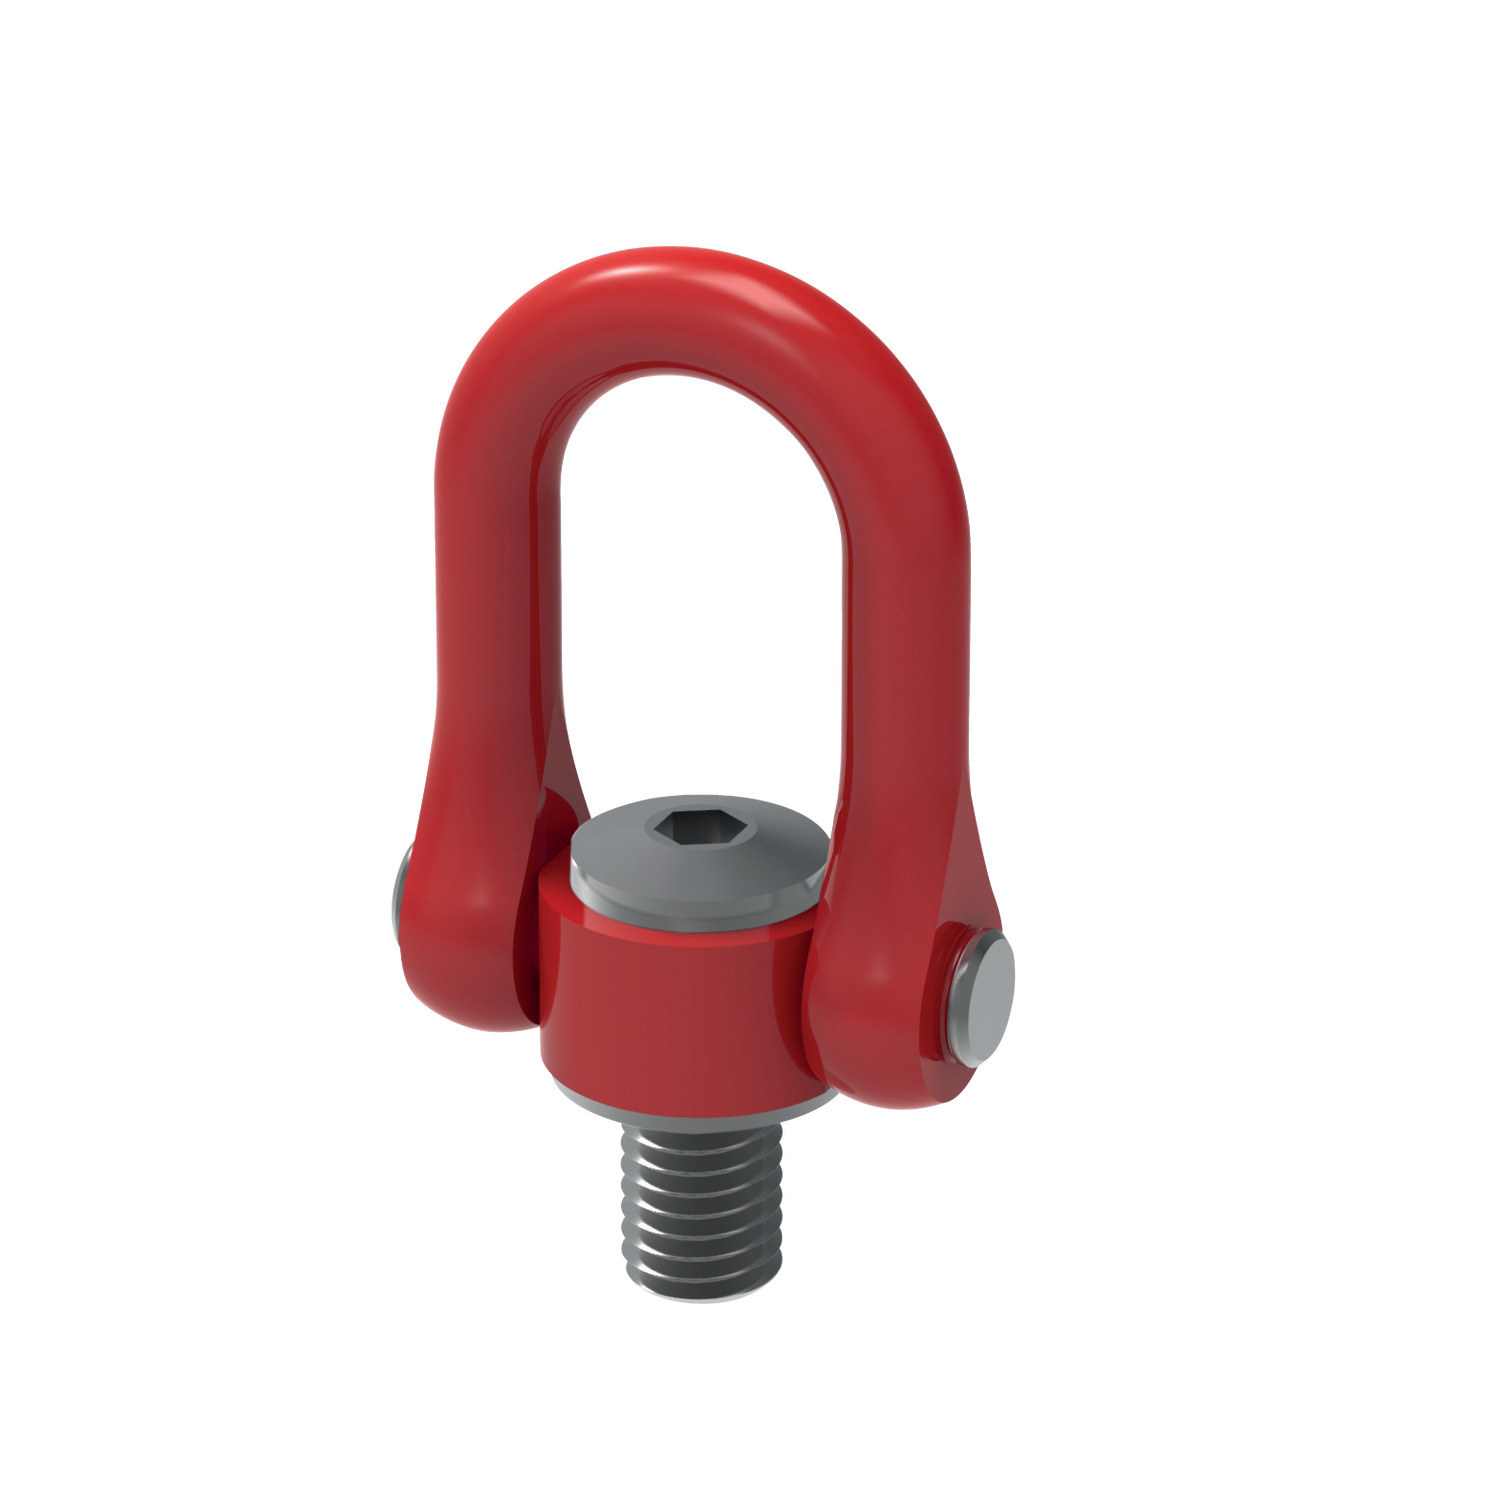 Double Swivel Shackles Male Heavy duty double swivel lifting bolts from Automotion. M24 to M100, loads of 32 tons per bolt.